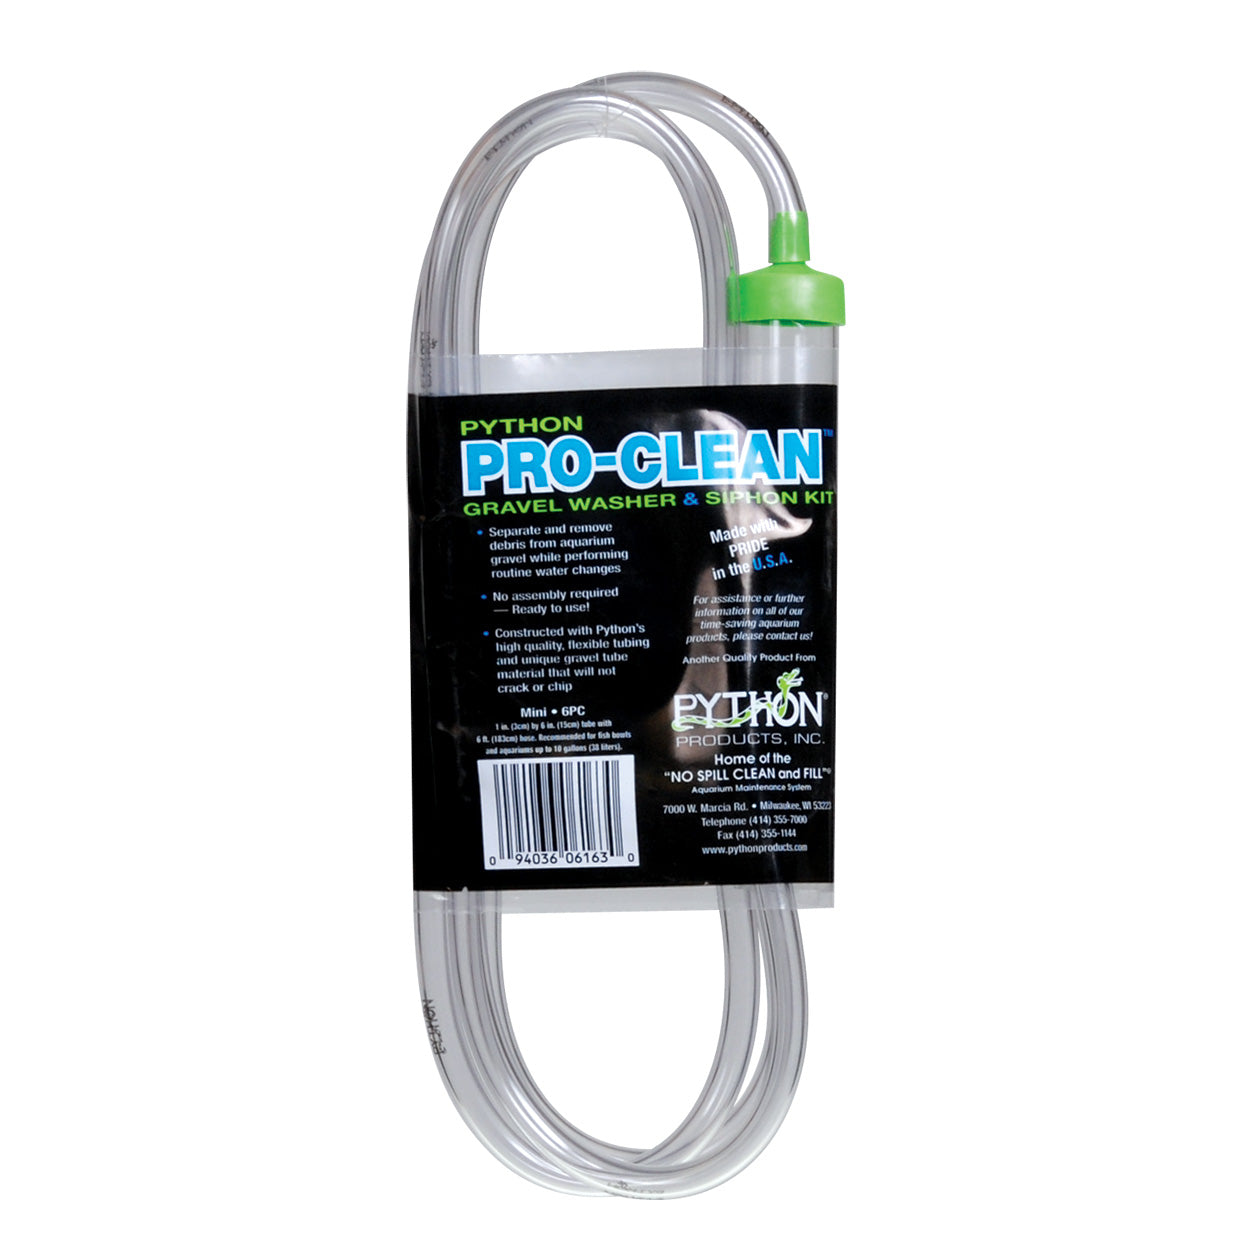 Pro-Clean Gravel Washer & Siphon Kit